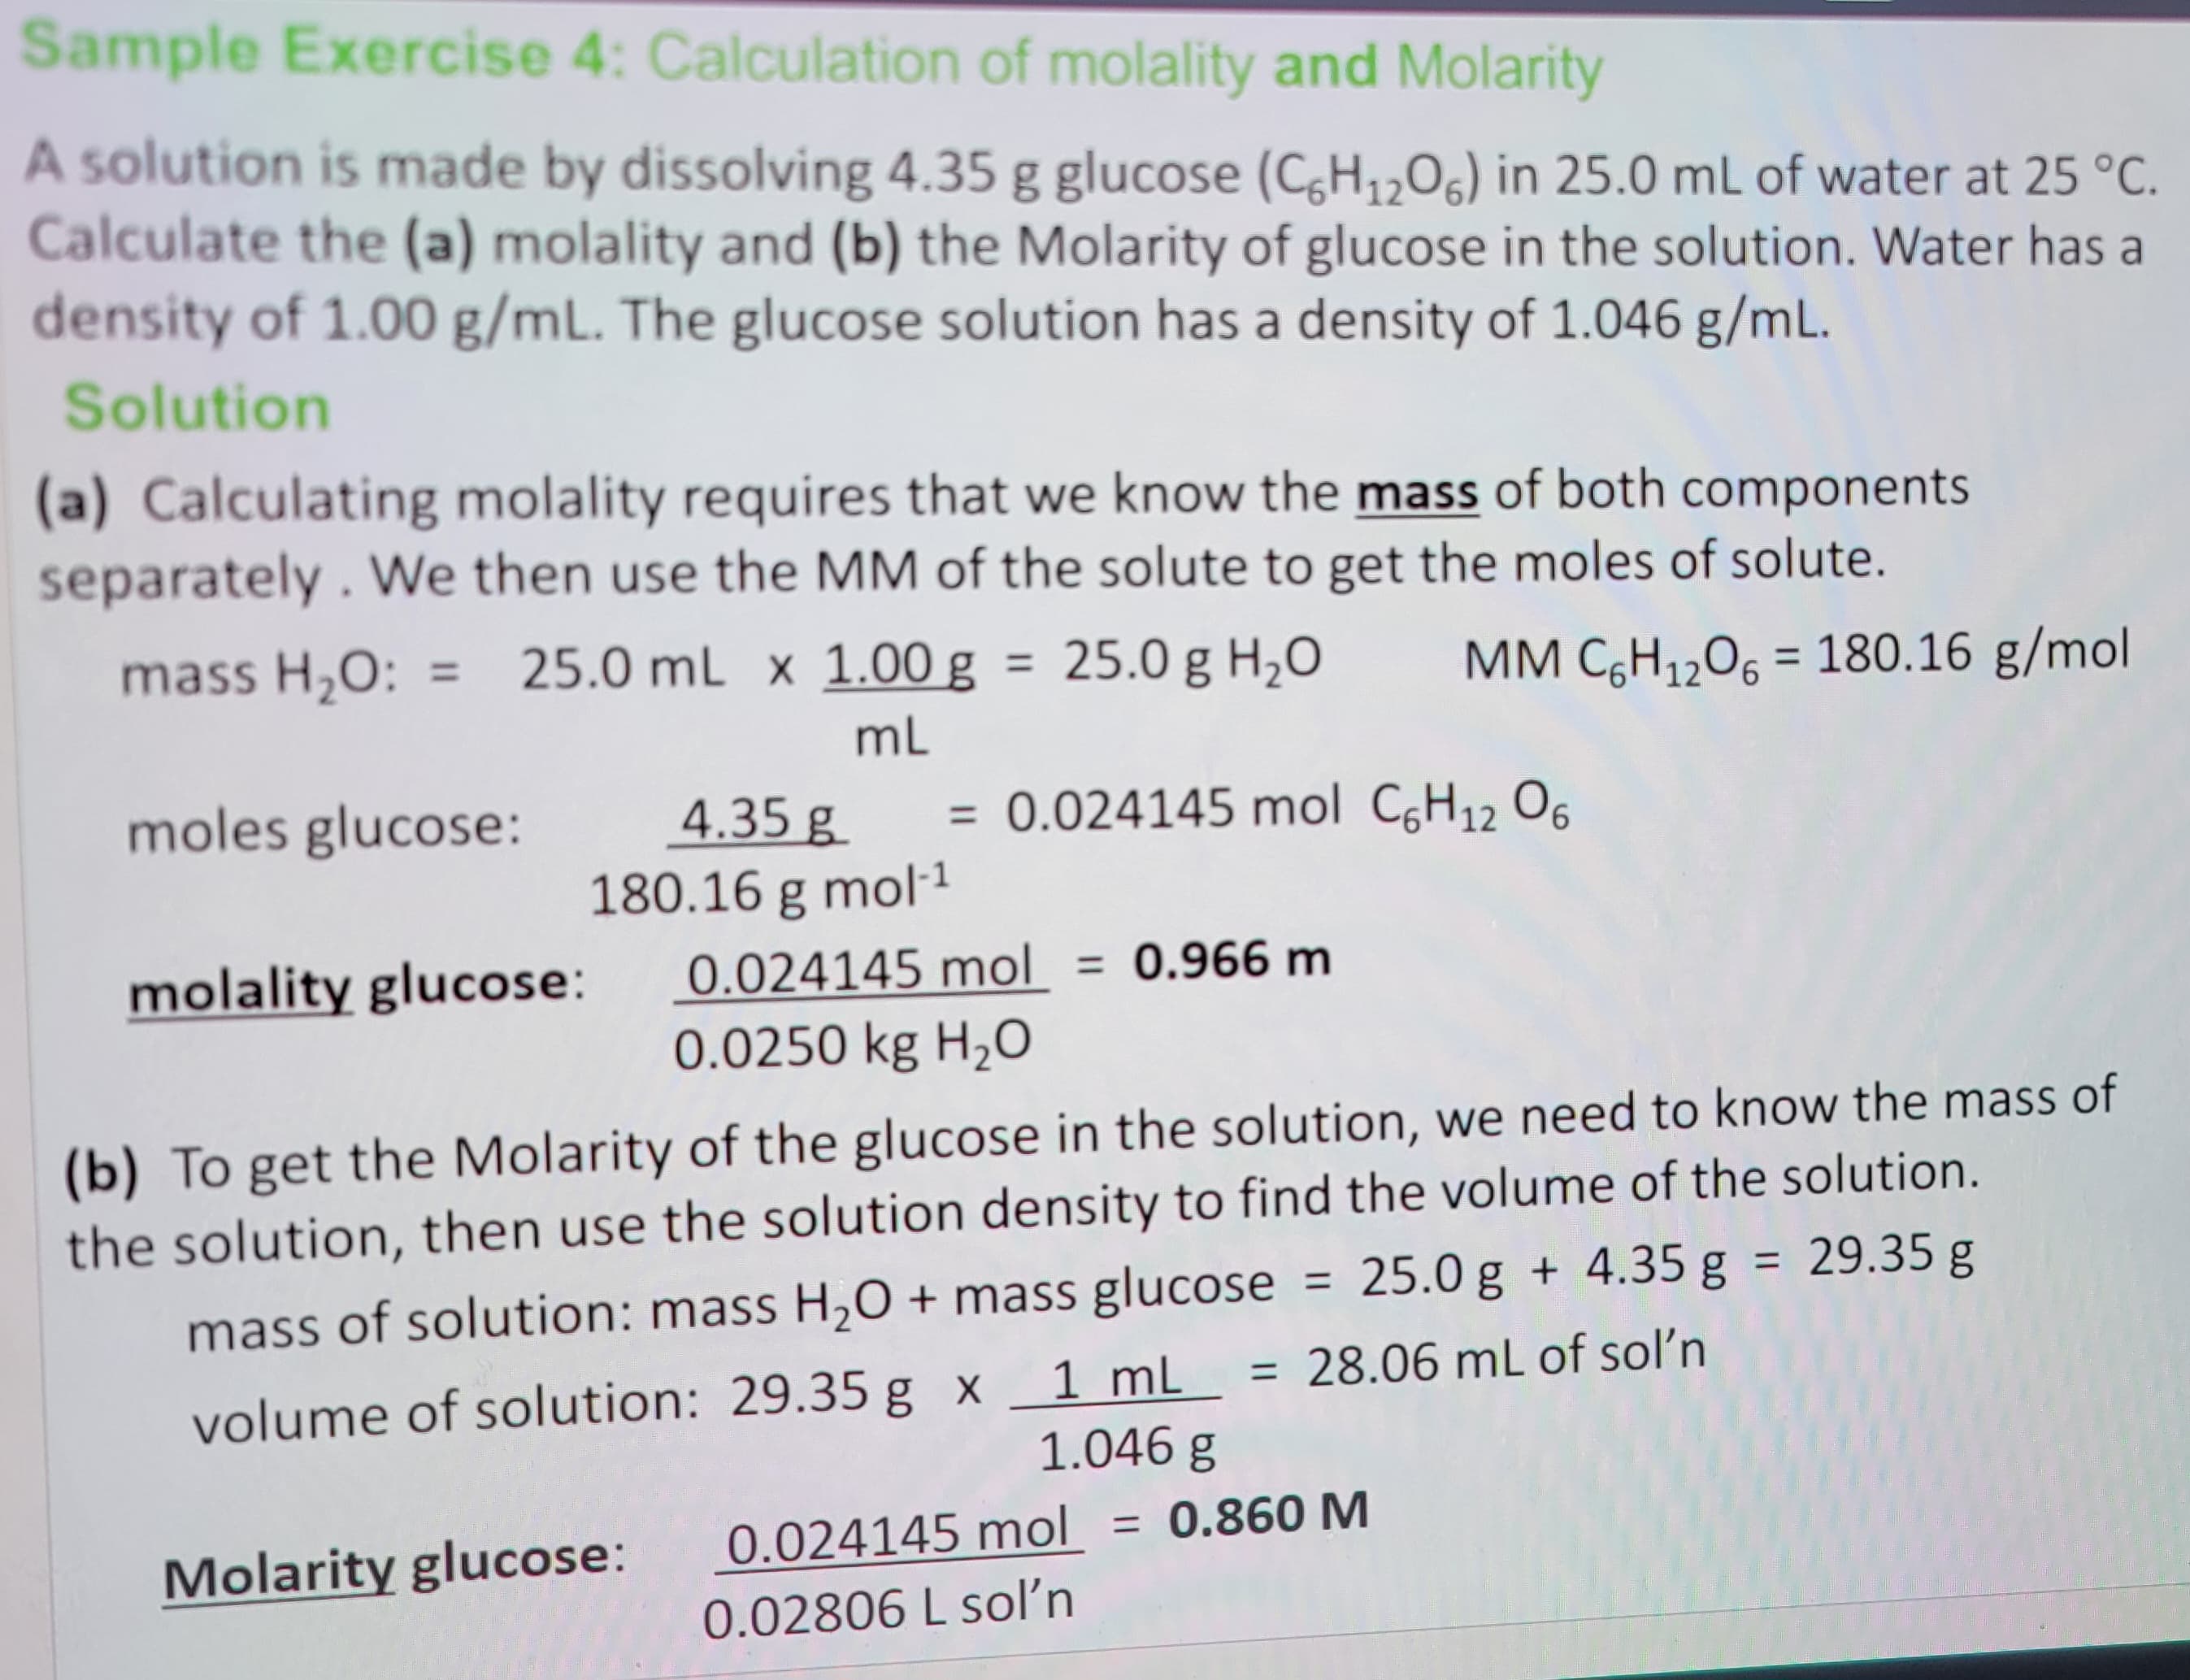 Sample Exercise 4: Calculation of molality and Molarity
A solution is made by dissolving 4.35 g glucose (C6H₁2O6) in 25.0 mL of water at 25 °C.
Calculate the (a) molality and (b) the Molarity of glucose in the solution. Water has a
density of 1.00 g/mL. The glucose solution has a density of 1.046 g/mL.
Solution
(a) Calculating molality requires that we know the mass of both components
separately. We then use the MM of the solute to get the moles of solute.
mass H₂O: = 25.0 mL x 1.00 g
25.0 mL x
mL
moles glucose:
1.00 g = 25.0 g H₂O MM C6H₁₂O6 = 180.16 g/mol
4.35 g
180.16 g mol-¹
= 0.024145 mol C6H₁2 06
molality glucose: 0.024145 mol = 0.966 m
0.0250 kg H₂O
Molarity glucose:
(b) To get the Molarity of the glucose in the solution, we need to know the mass of
the solution, then use the solution density to find the volume of the solution.
mass of solution: mass H₂O + mass glucose = 25.0 g + 4.35 g = 29.35 g
volume of solution: 29.35 g x 1 mL = 28.06 mL of sol'n
1.046 g
= 0.860 M
0.024145 mol
0.02806 L sol'n